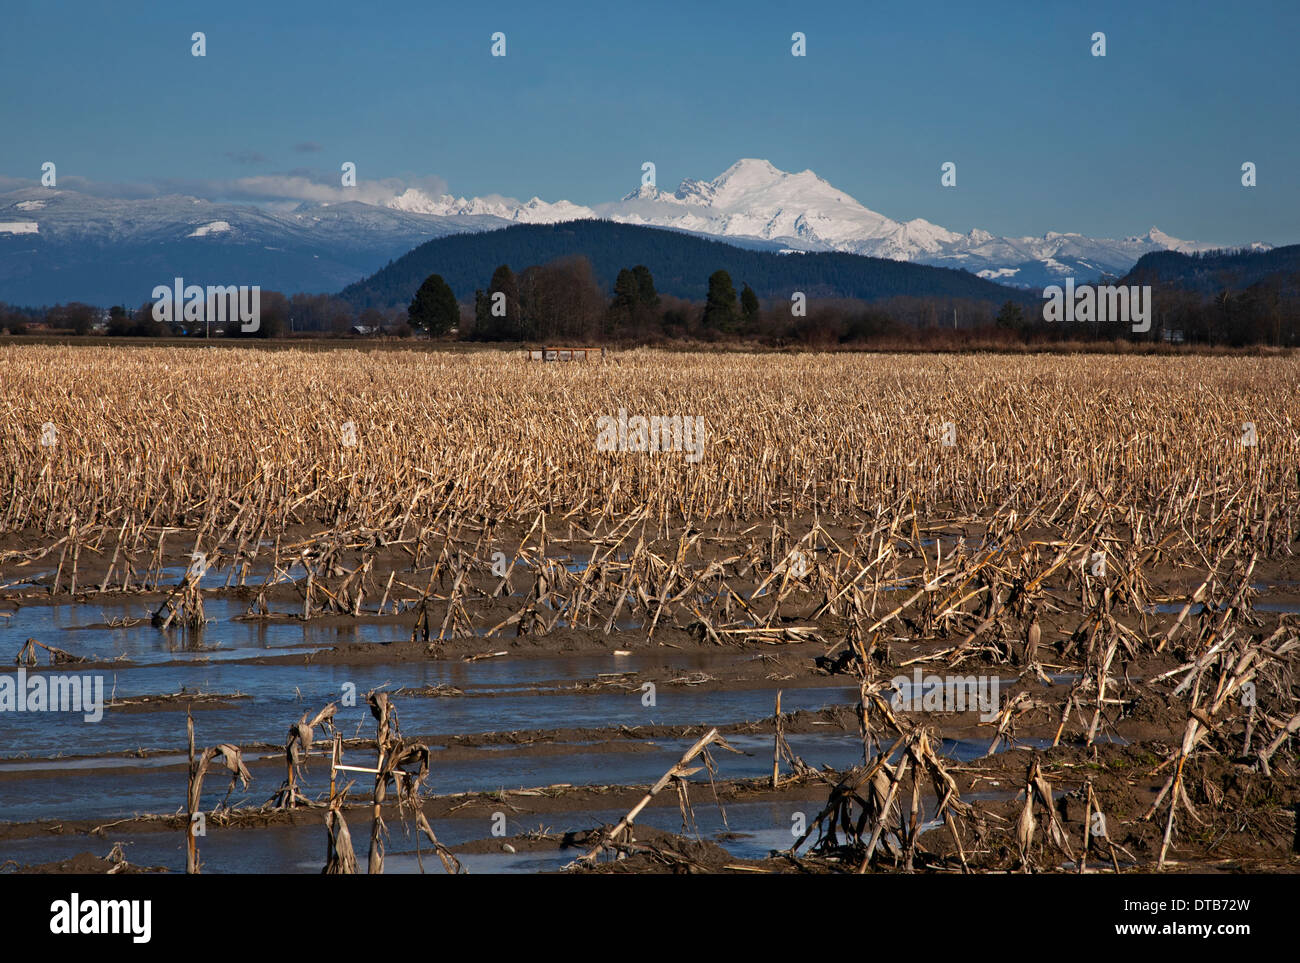 WASHINGTON - Mount Baker rising above a partially flooded corn field on Fox Island in the Skagit River Delta. Stock Photo